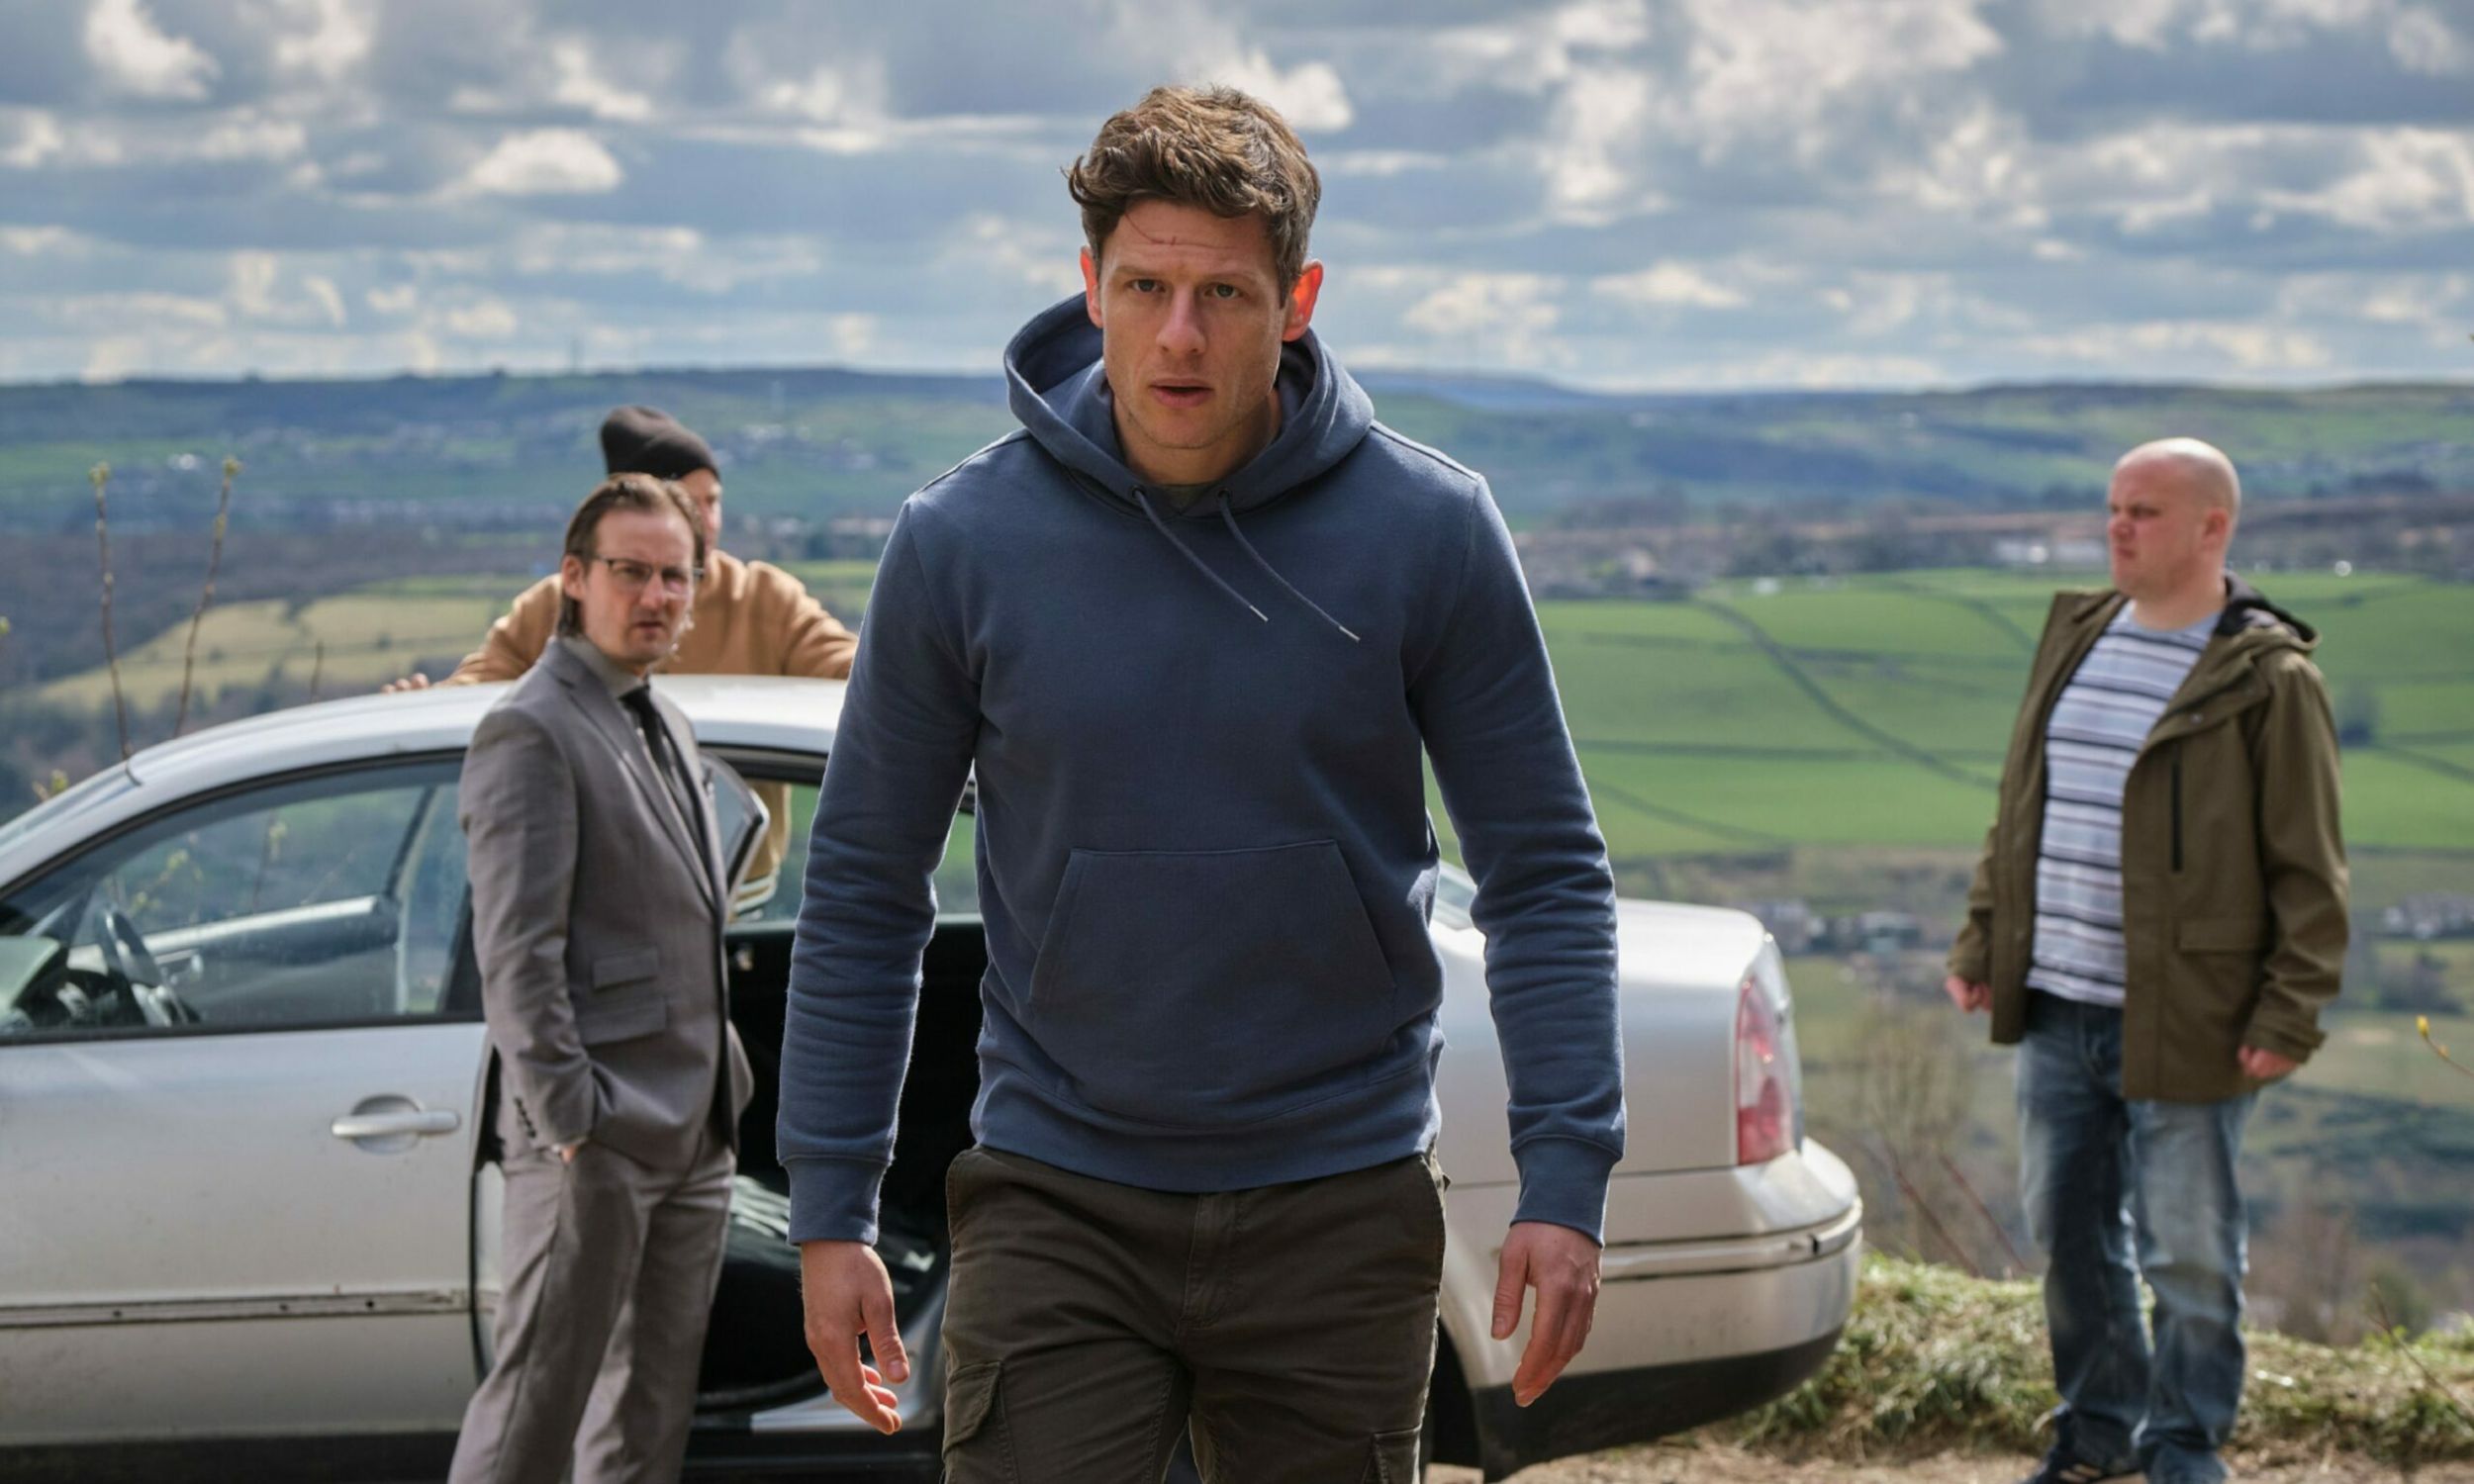 Anthony Flanagan as Viktor, Greg Kolpakchi as Zeljko, and James Norton as Tommy Lee Royce about to get in the car in Happy Valley Season 3